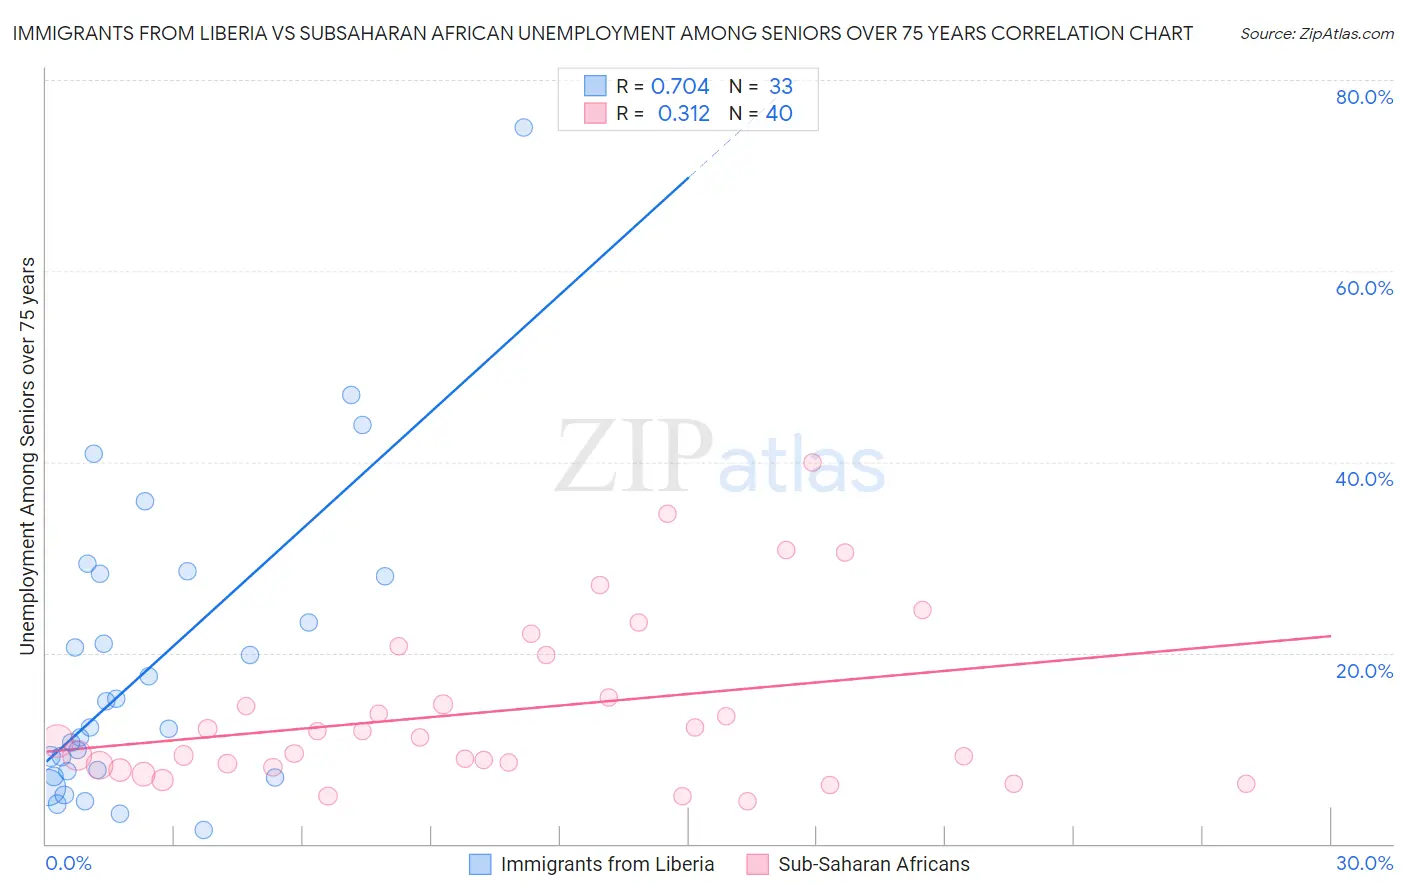 Immigrants from Liberia vs Subsaharan African Unemployment Among Seniors over 75 years